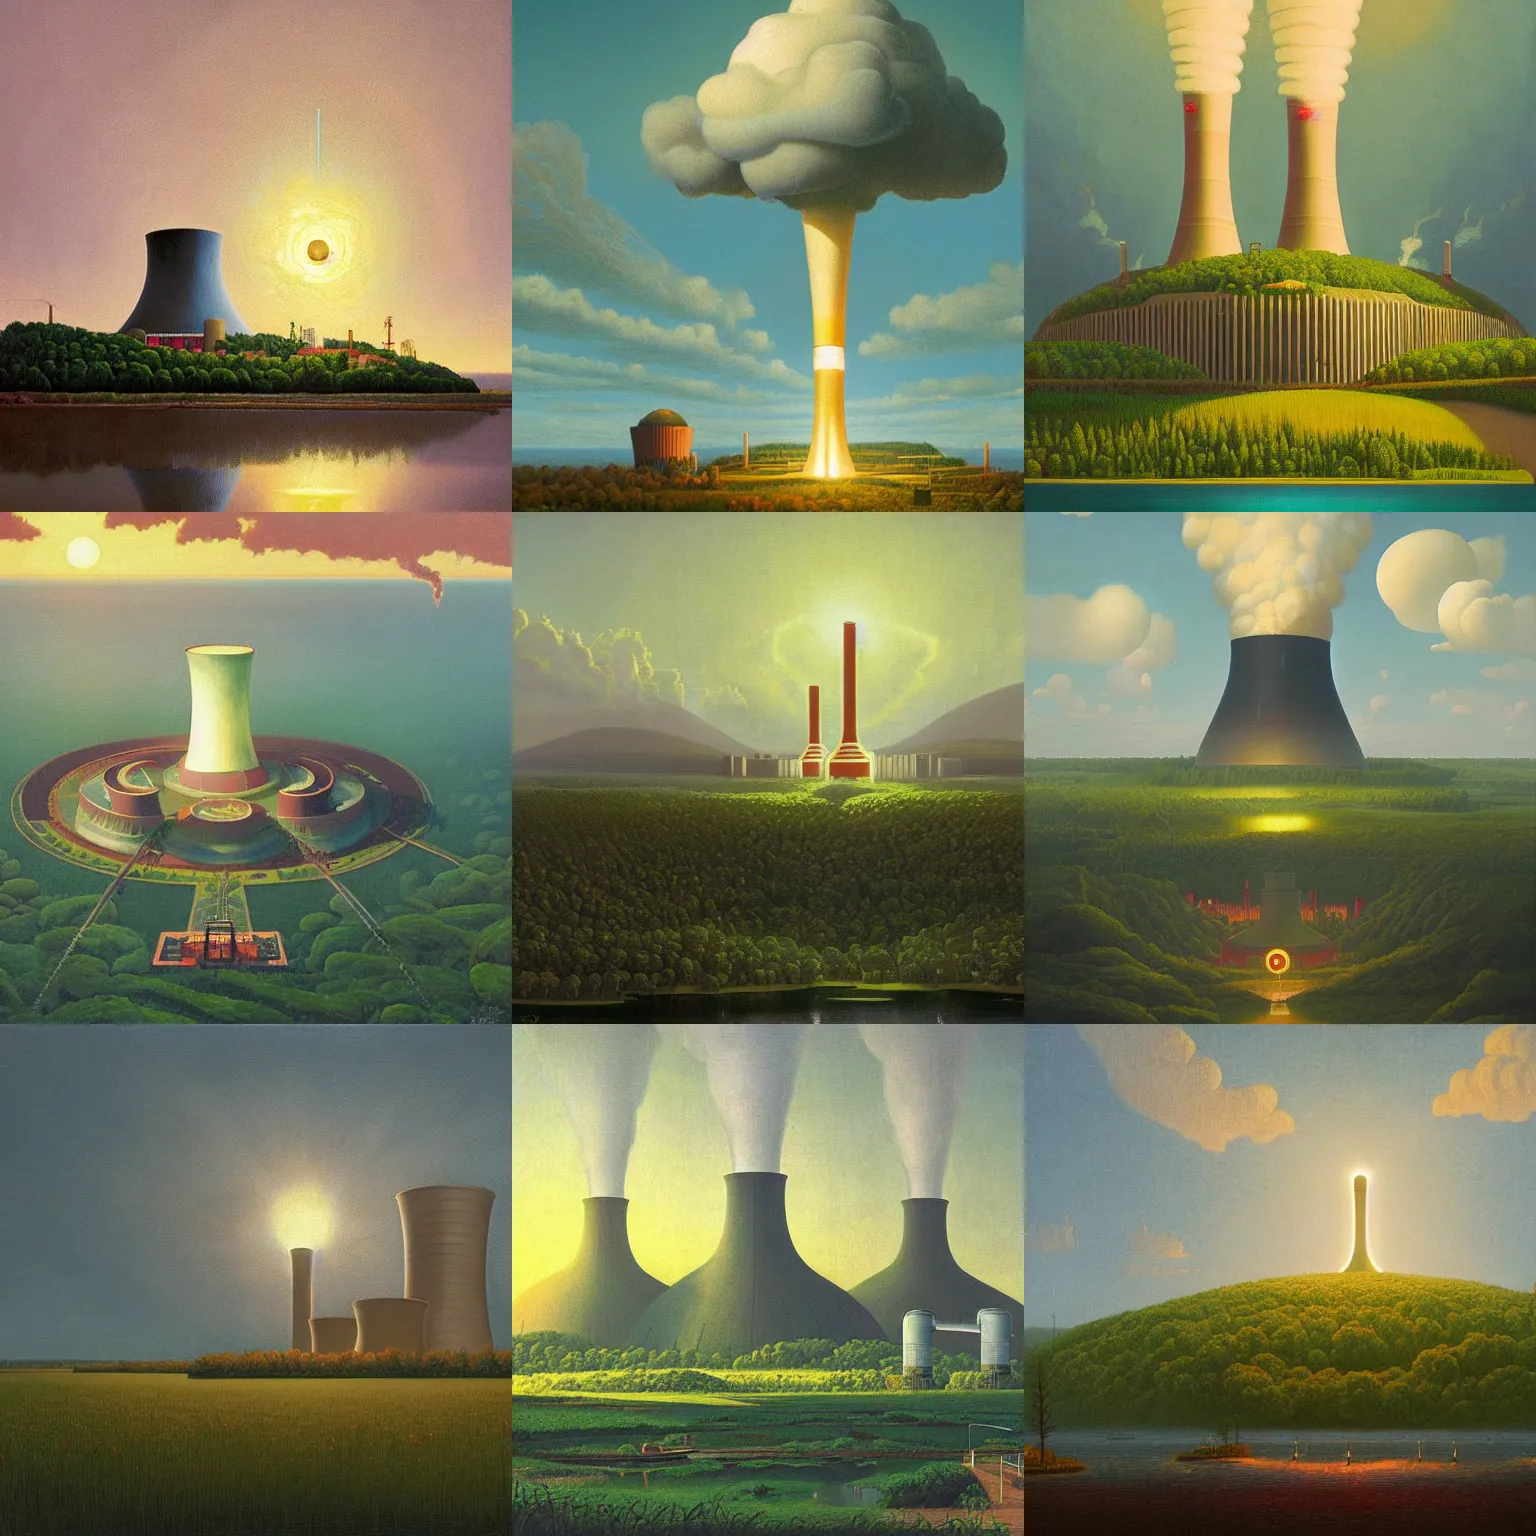 Prompt: A nuclear power plant in a lush island utopia by Simon Stålenhag and Grant Wood, oil on canvas, heavenly rapture